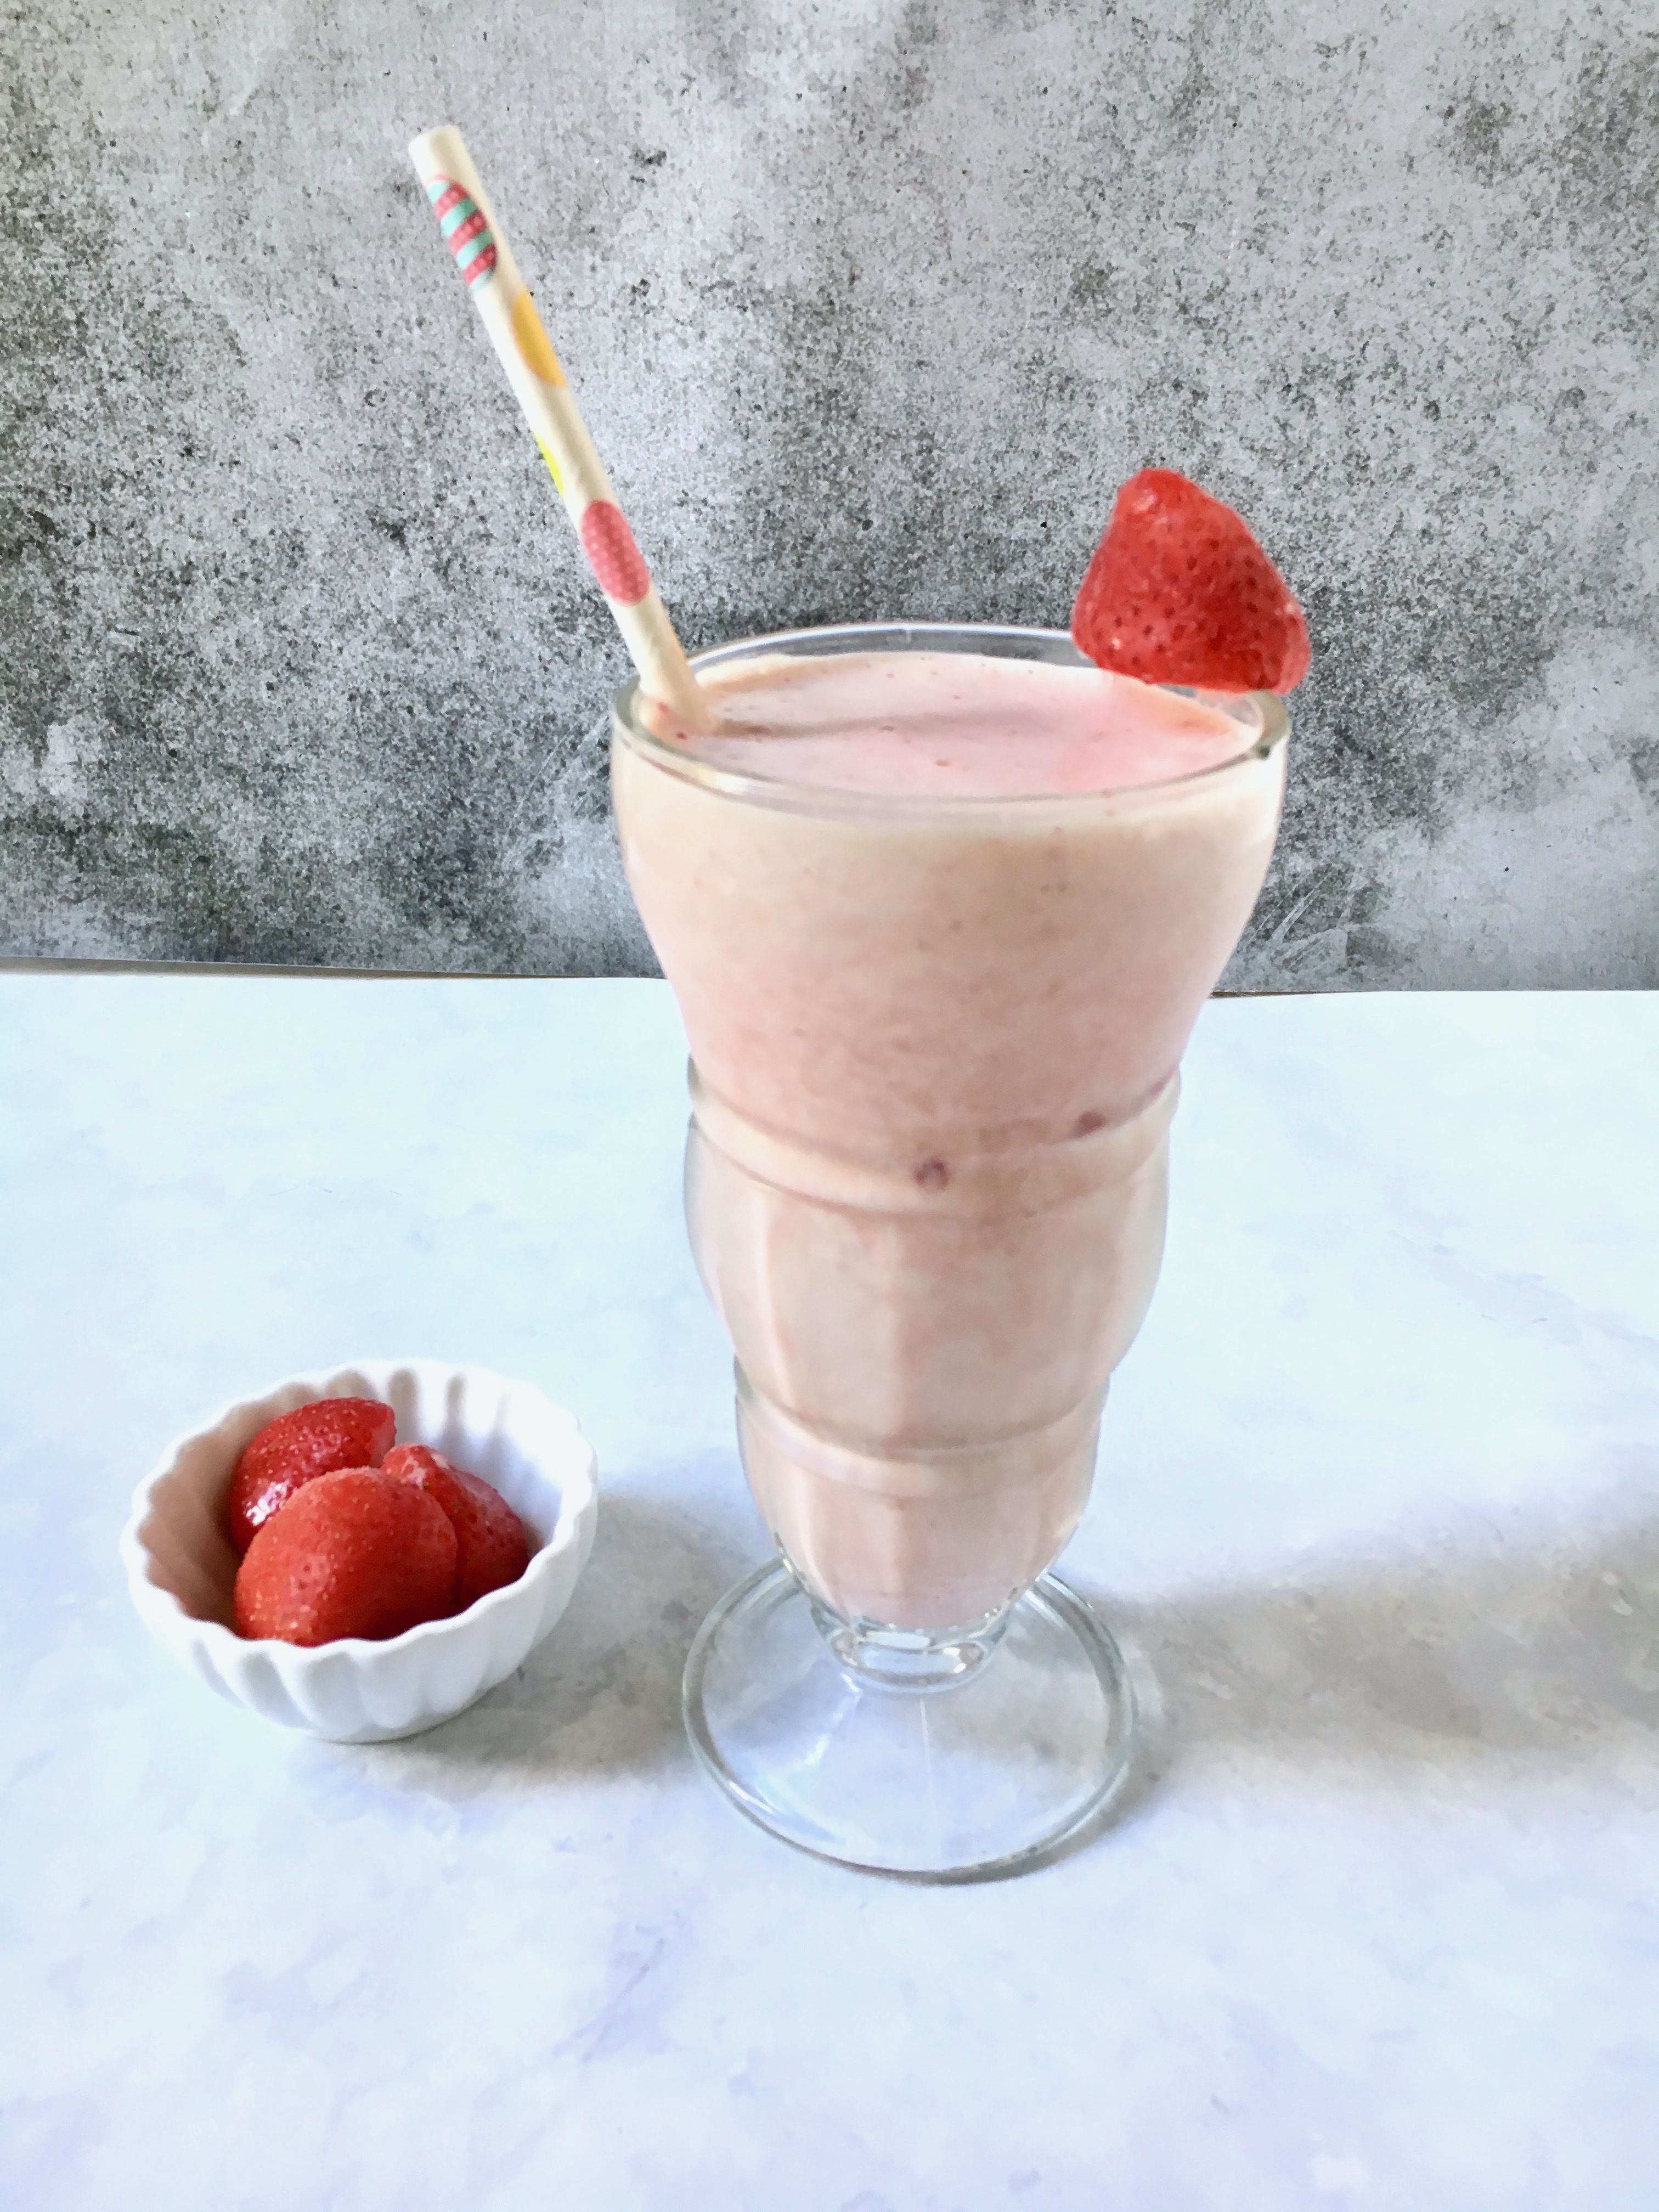 Try this healthy Strawberry Cheesecake Protein Smoothie for a delicious variation on a fruit-based smoothie. The cream cheese adds just the right amount of cheesecake-like creaminess to make this smoothie a decadent, yet healthy treat.